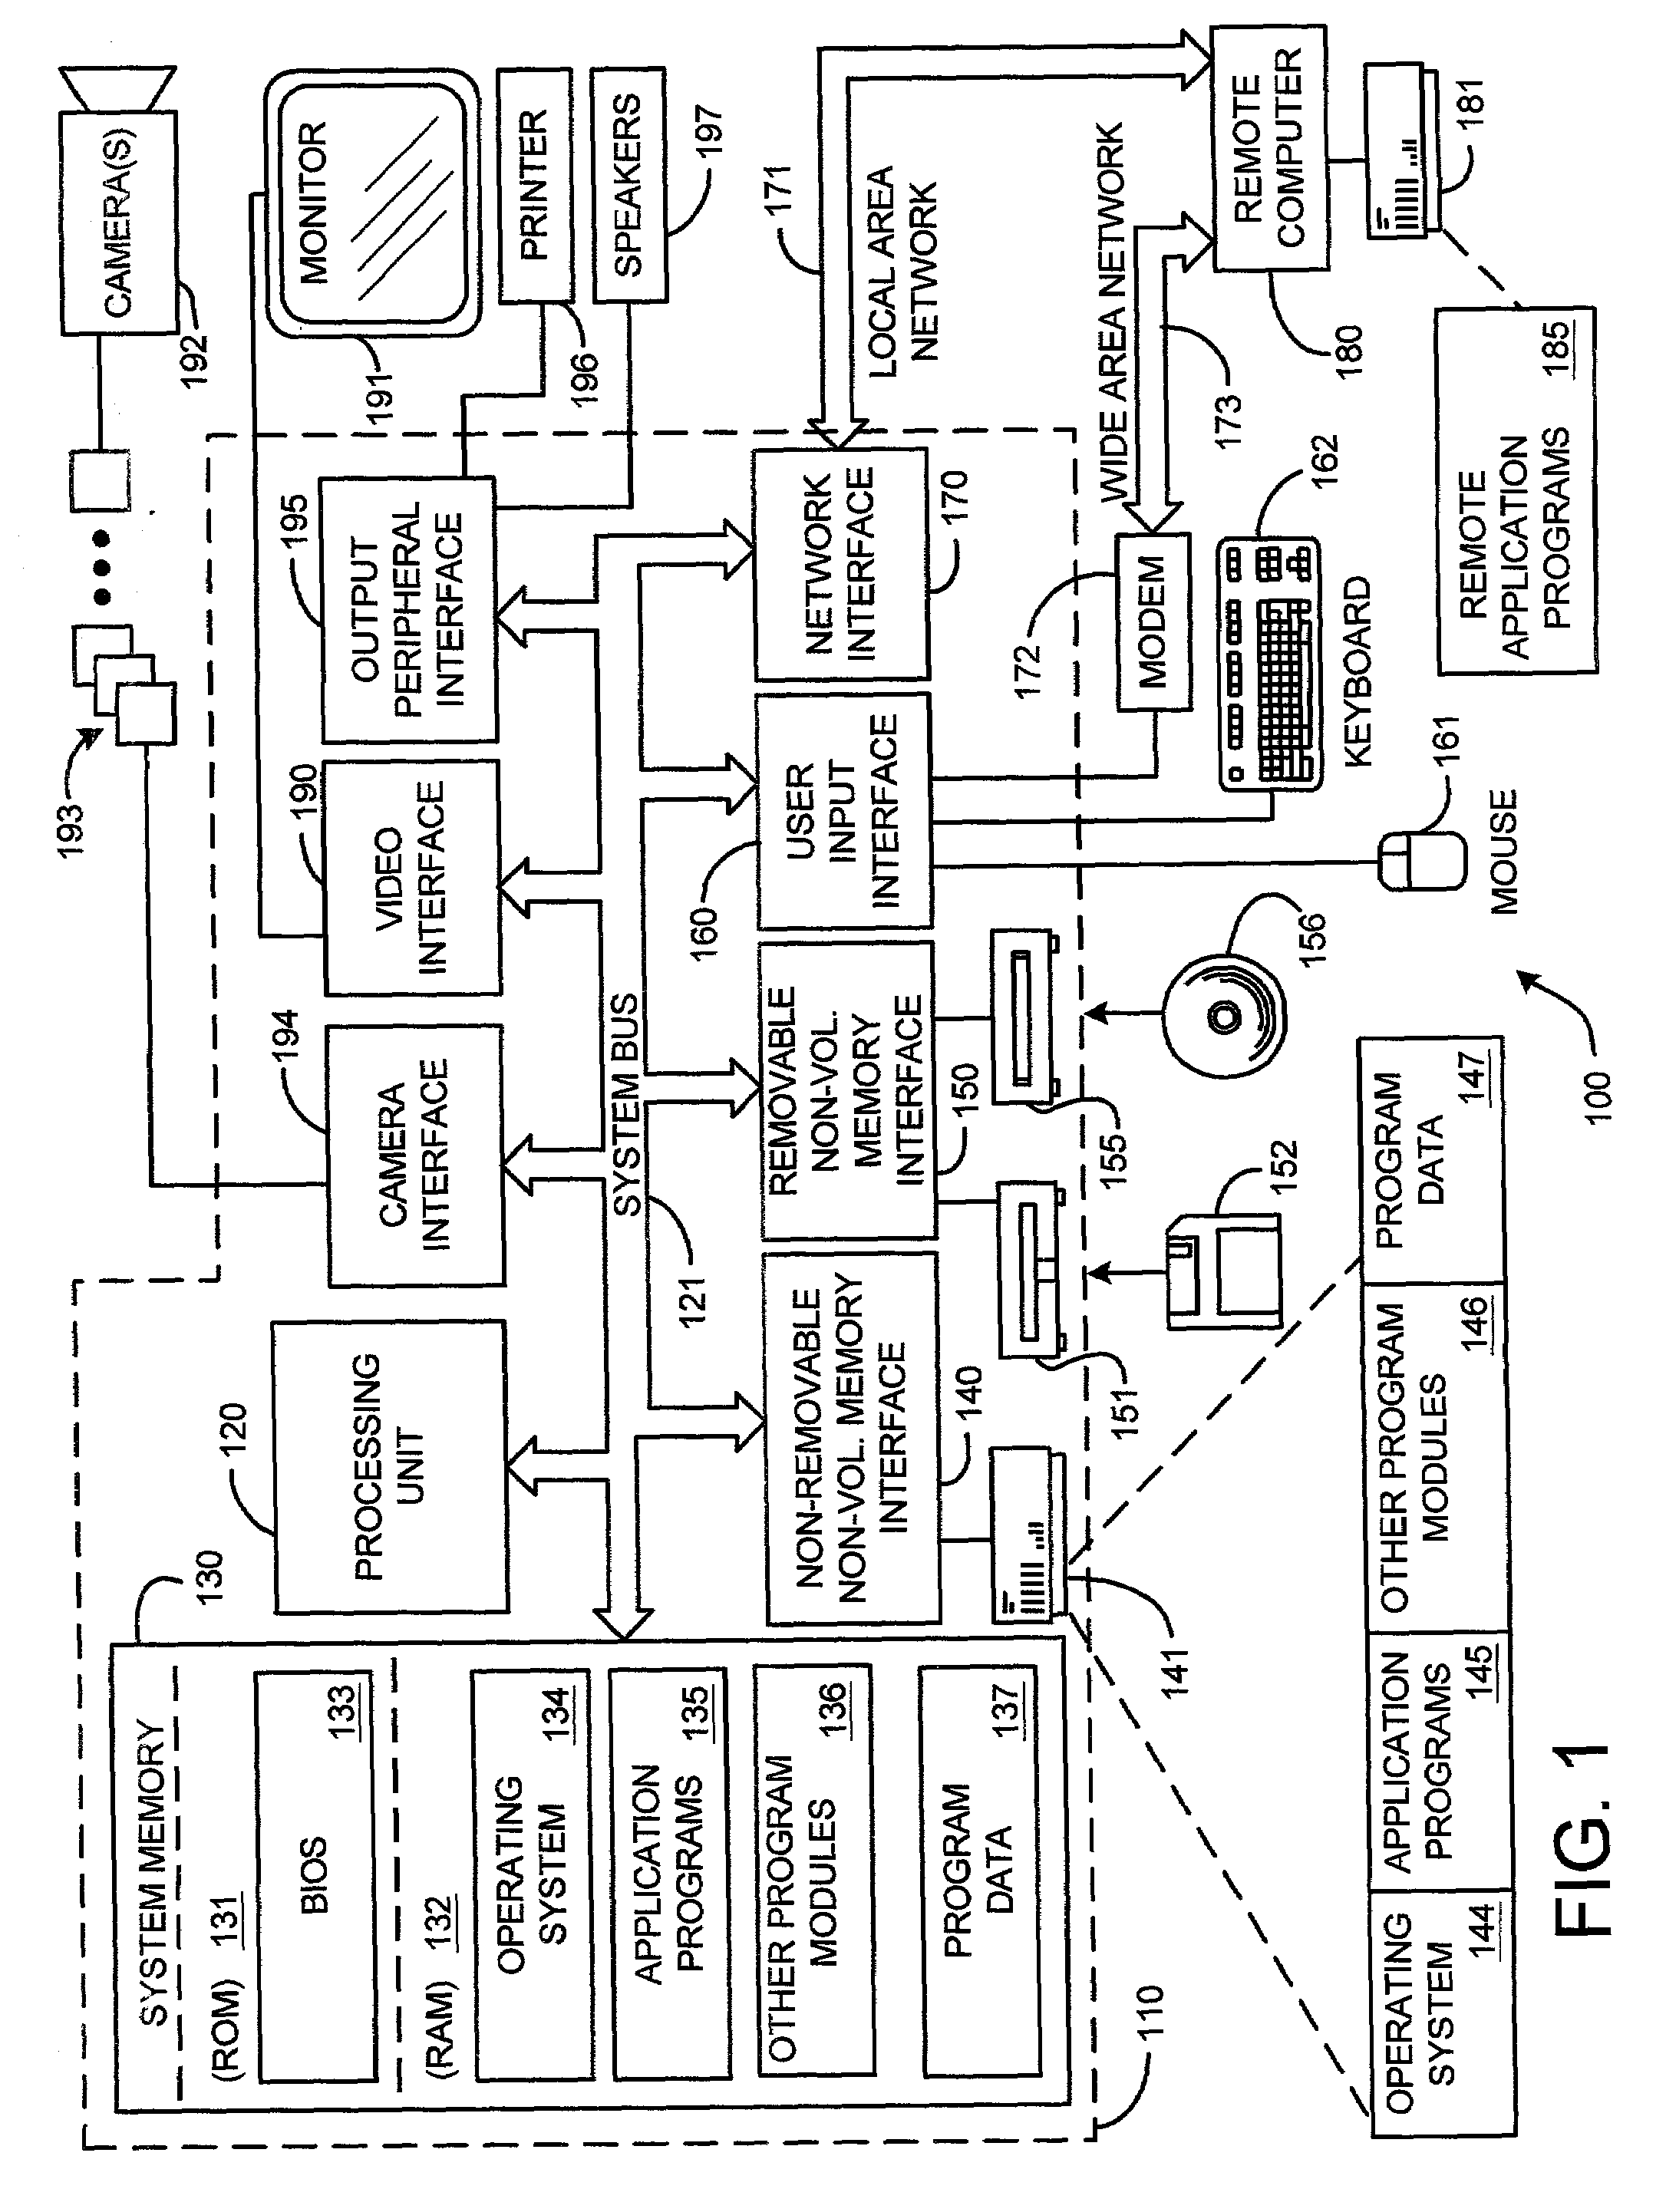 System and method deghosting mosaics using multiperspective plane sweep